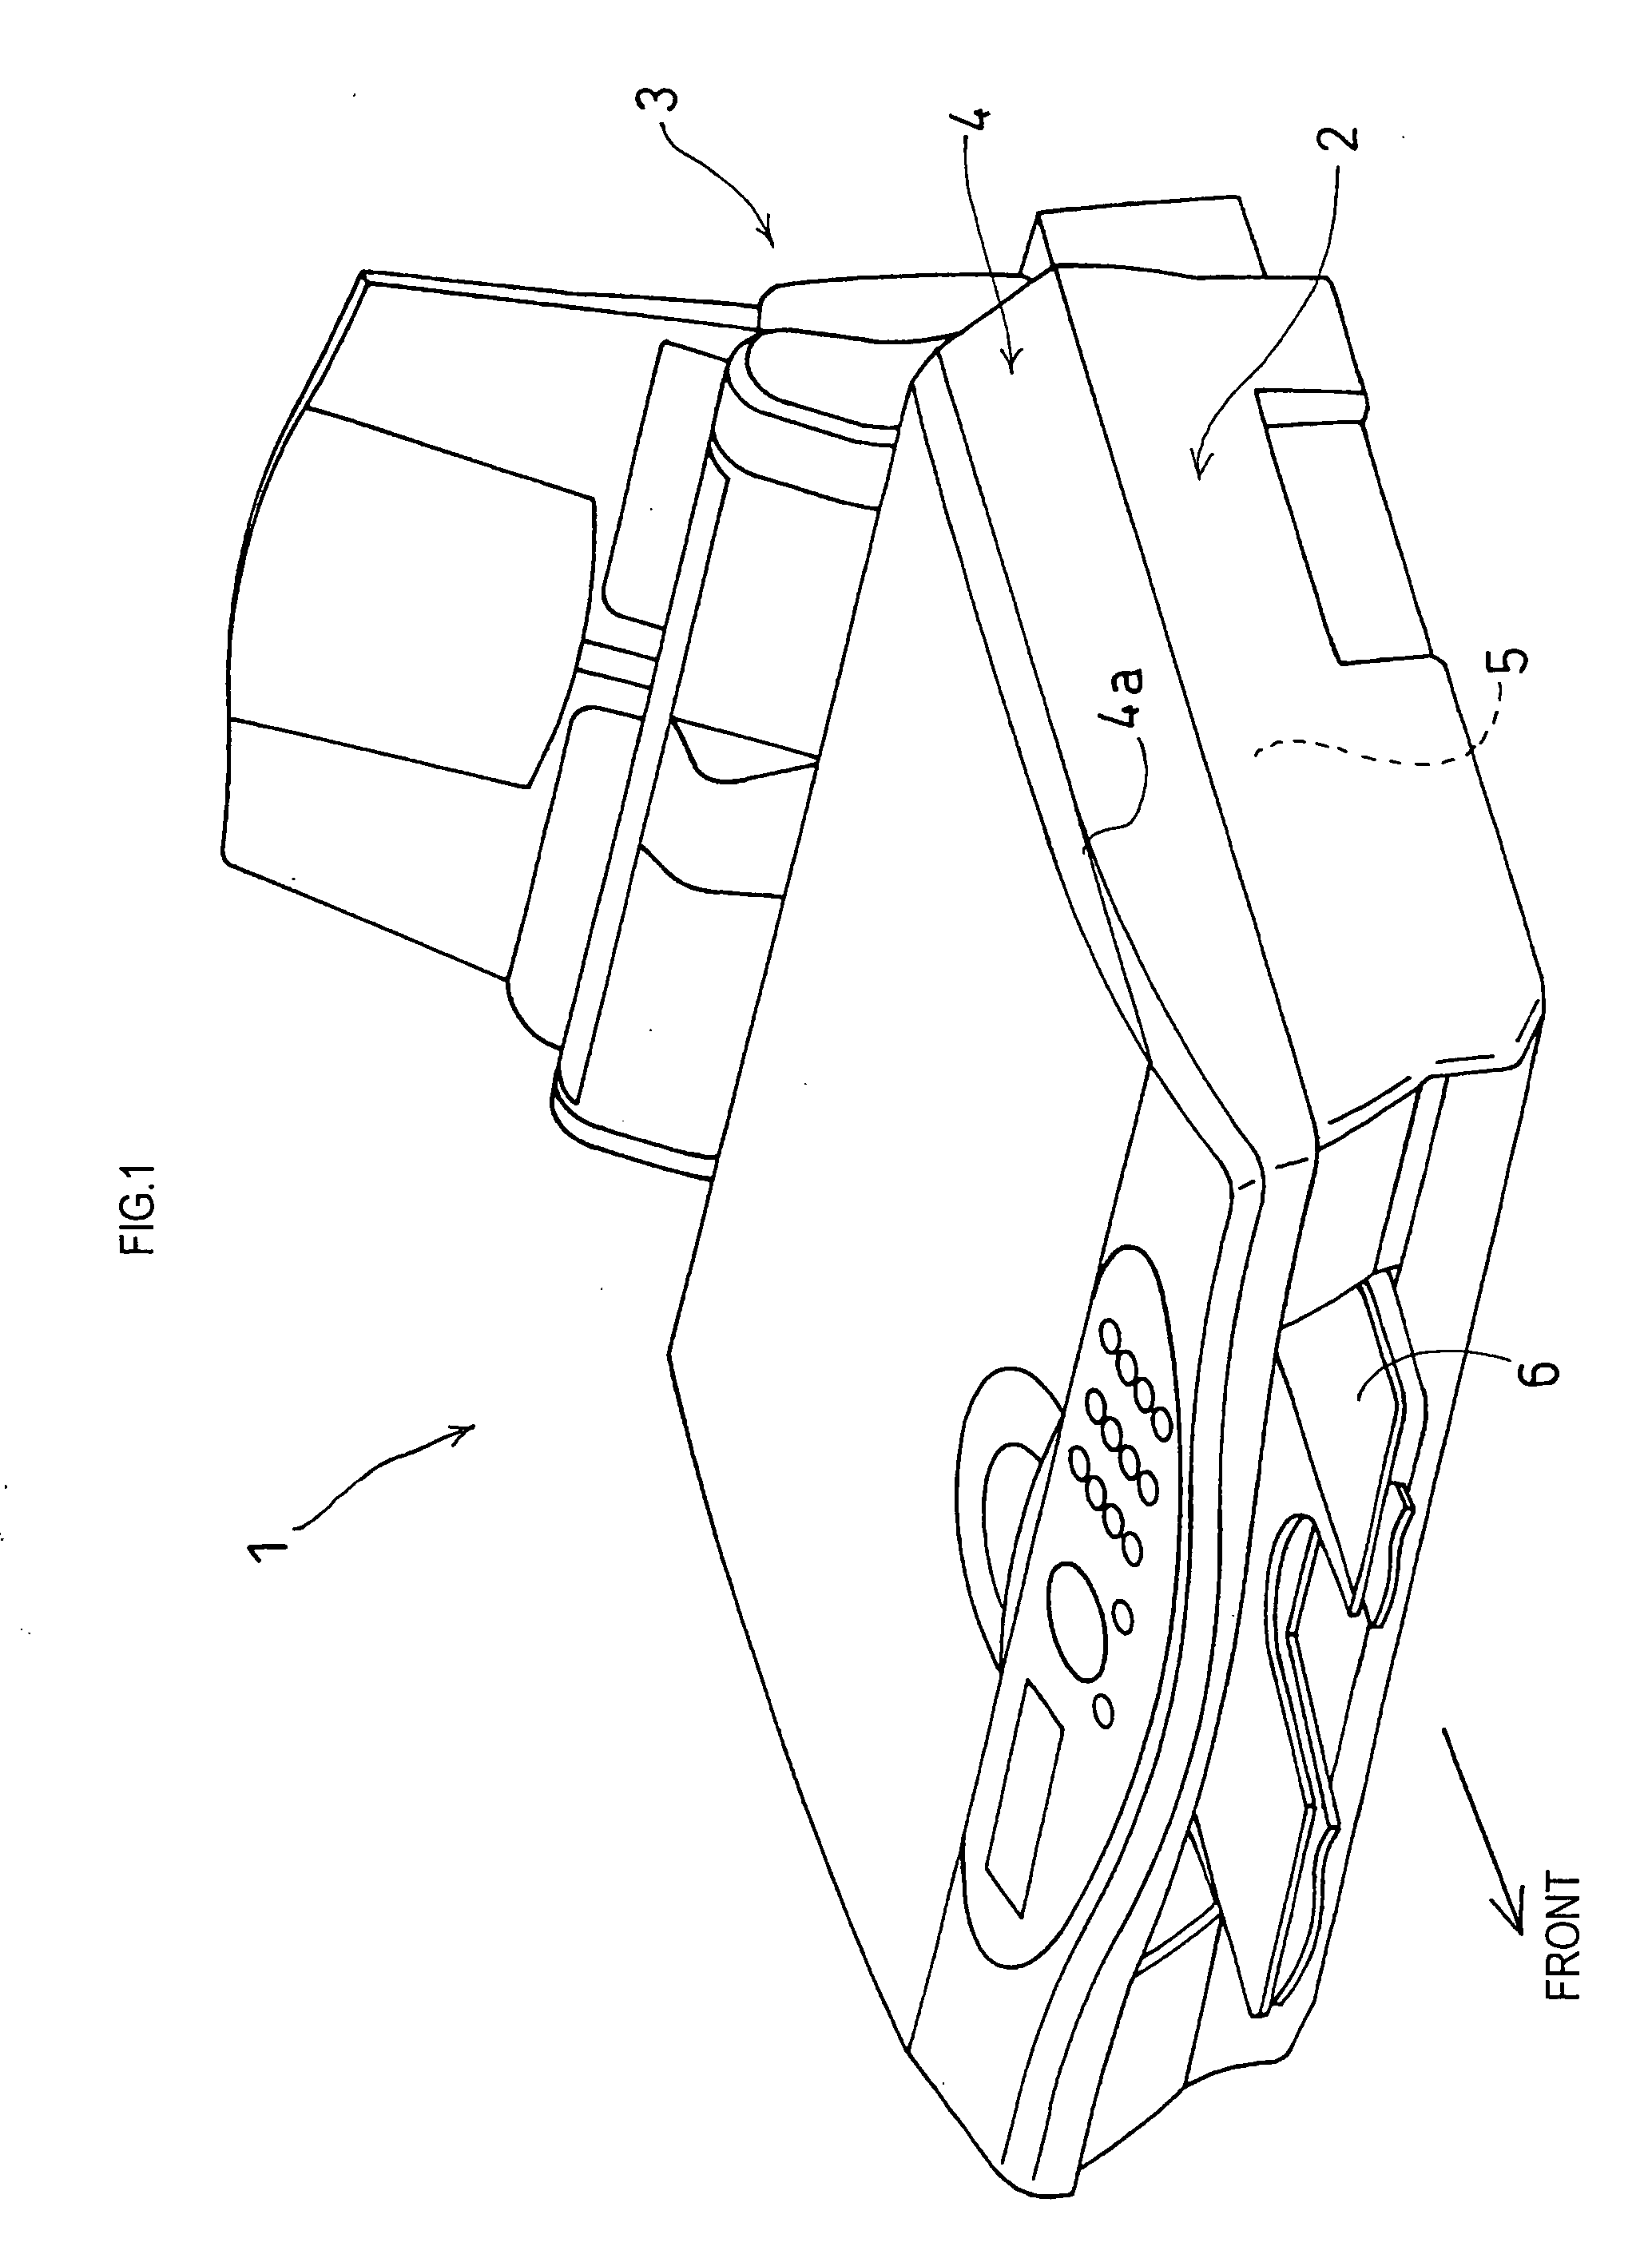 Cap and droplet discharge apparatus